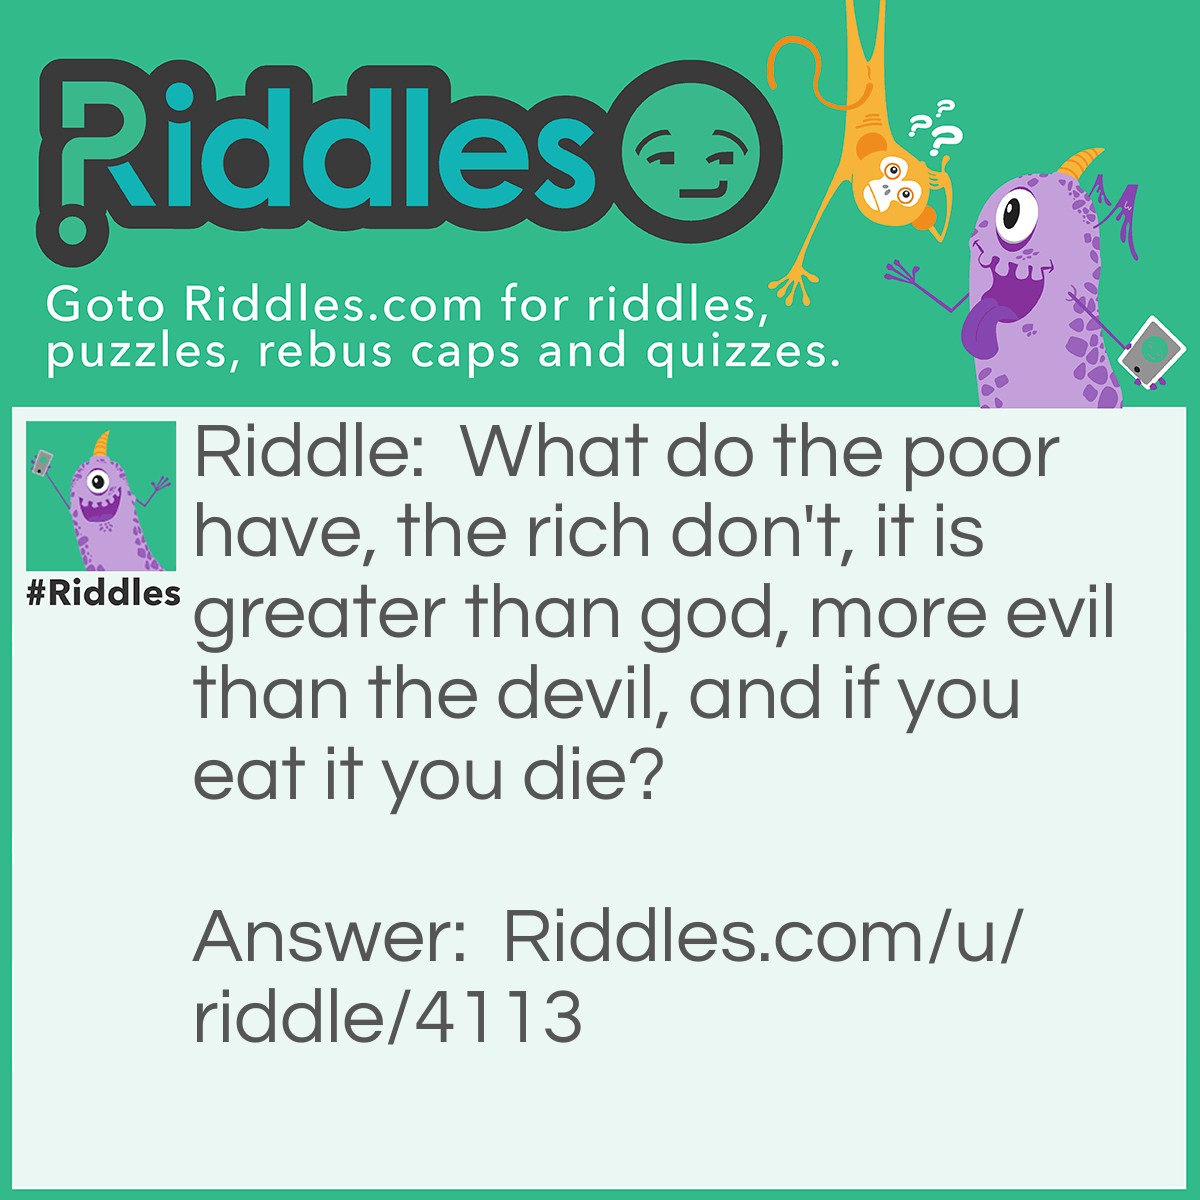 Riddle: What do the poor have, the rich don't, it is greater than god, more evil than the devil, and if you eat it you die? Answer: Nothing.